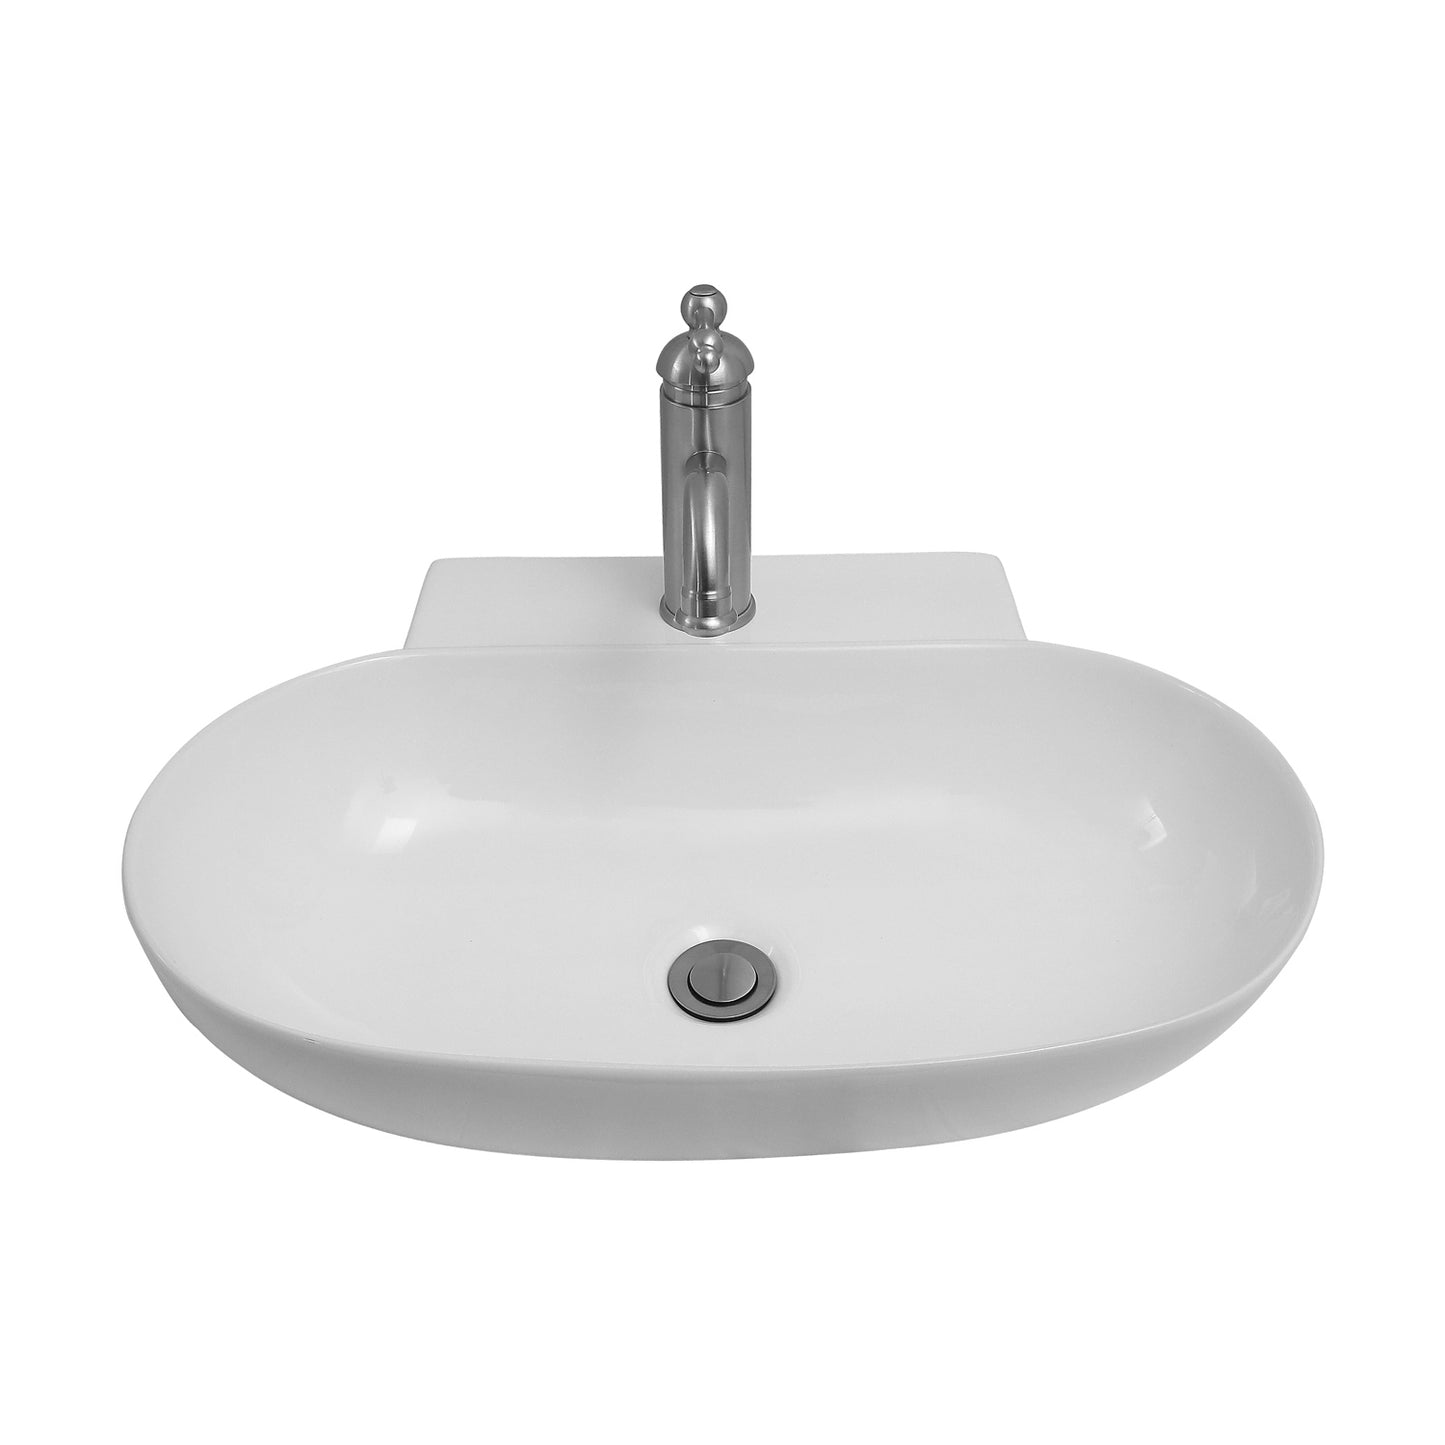 Leith 22" Wall Hung Bathroom Sink with 1 Faucet Hole White